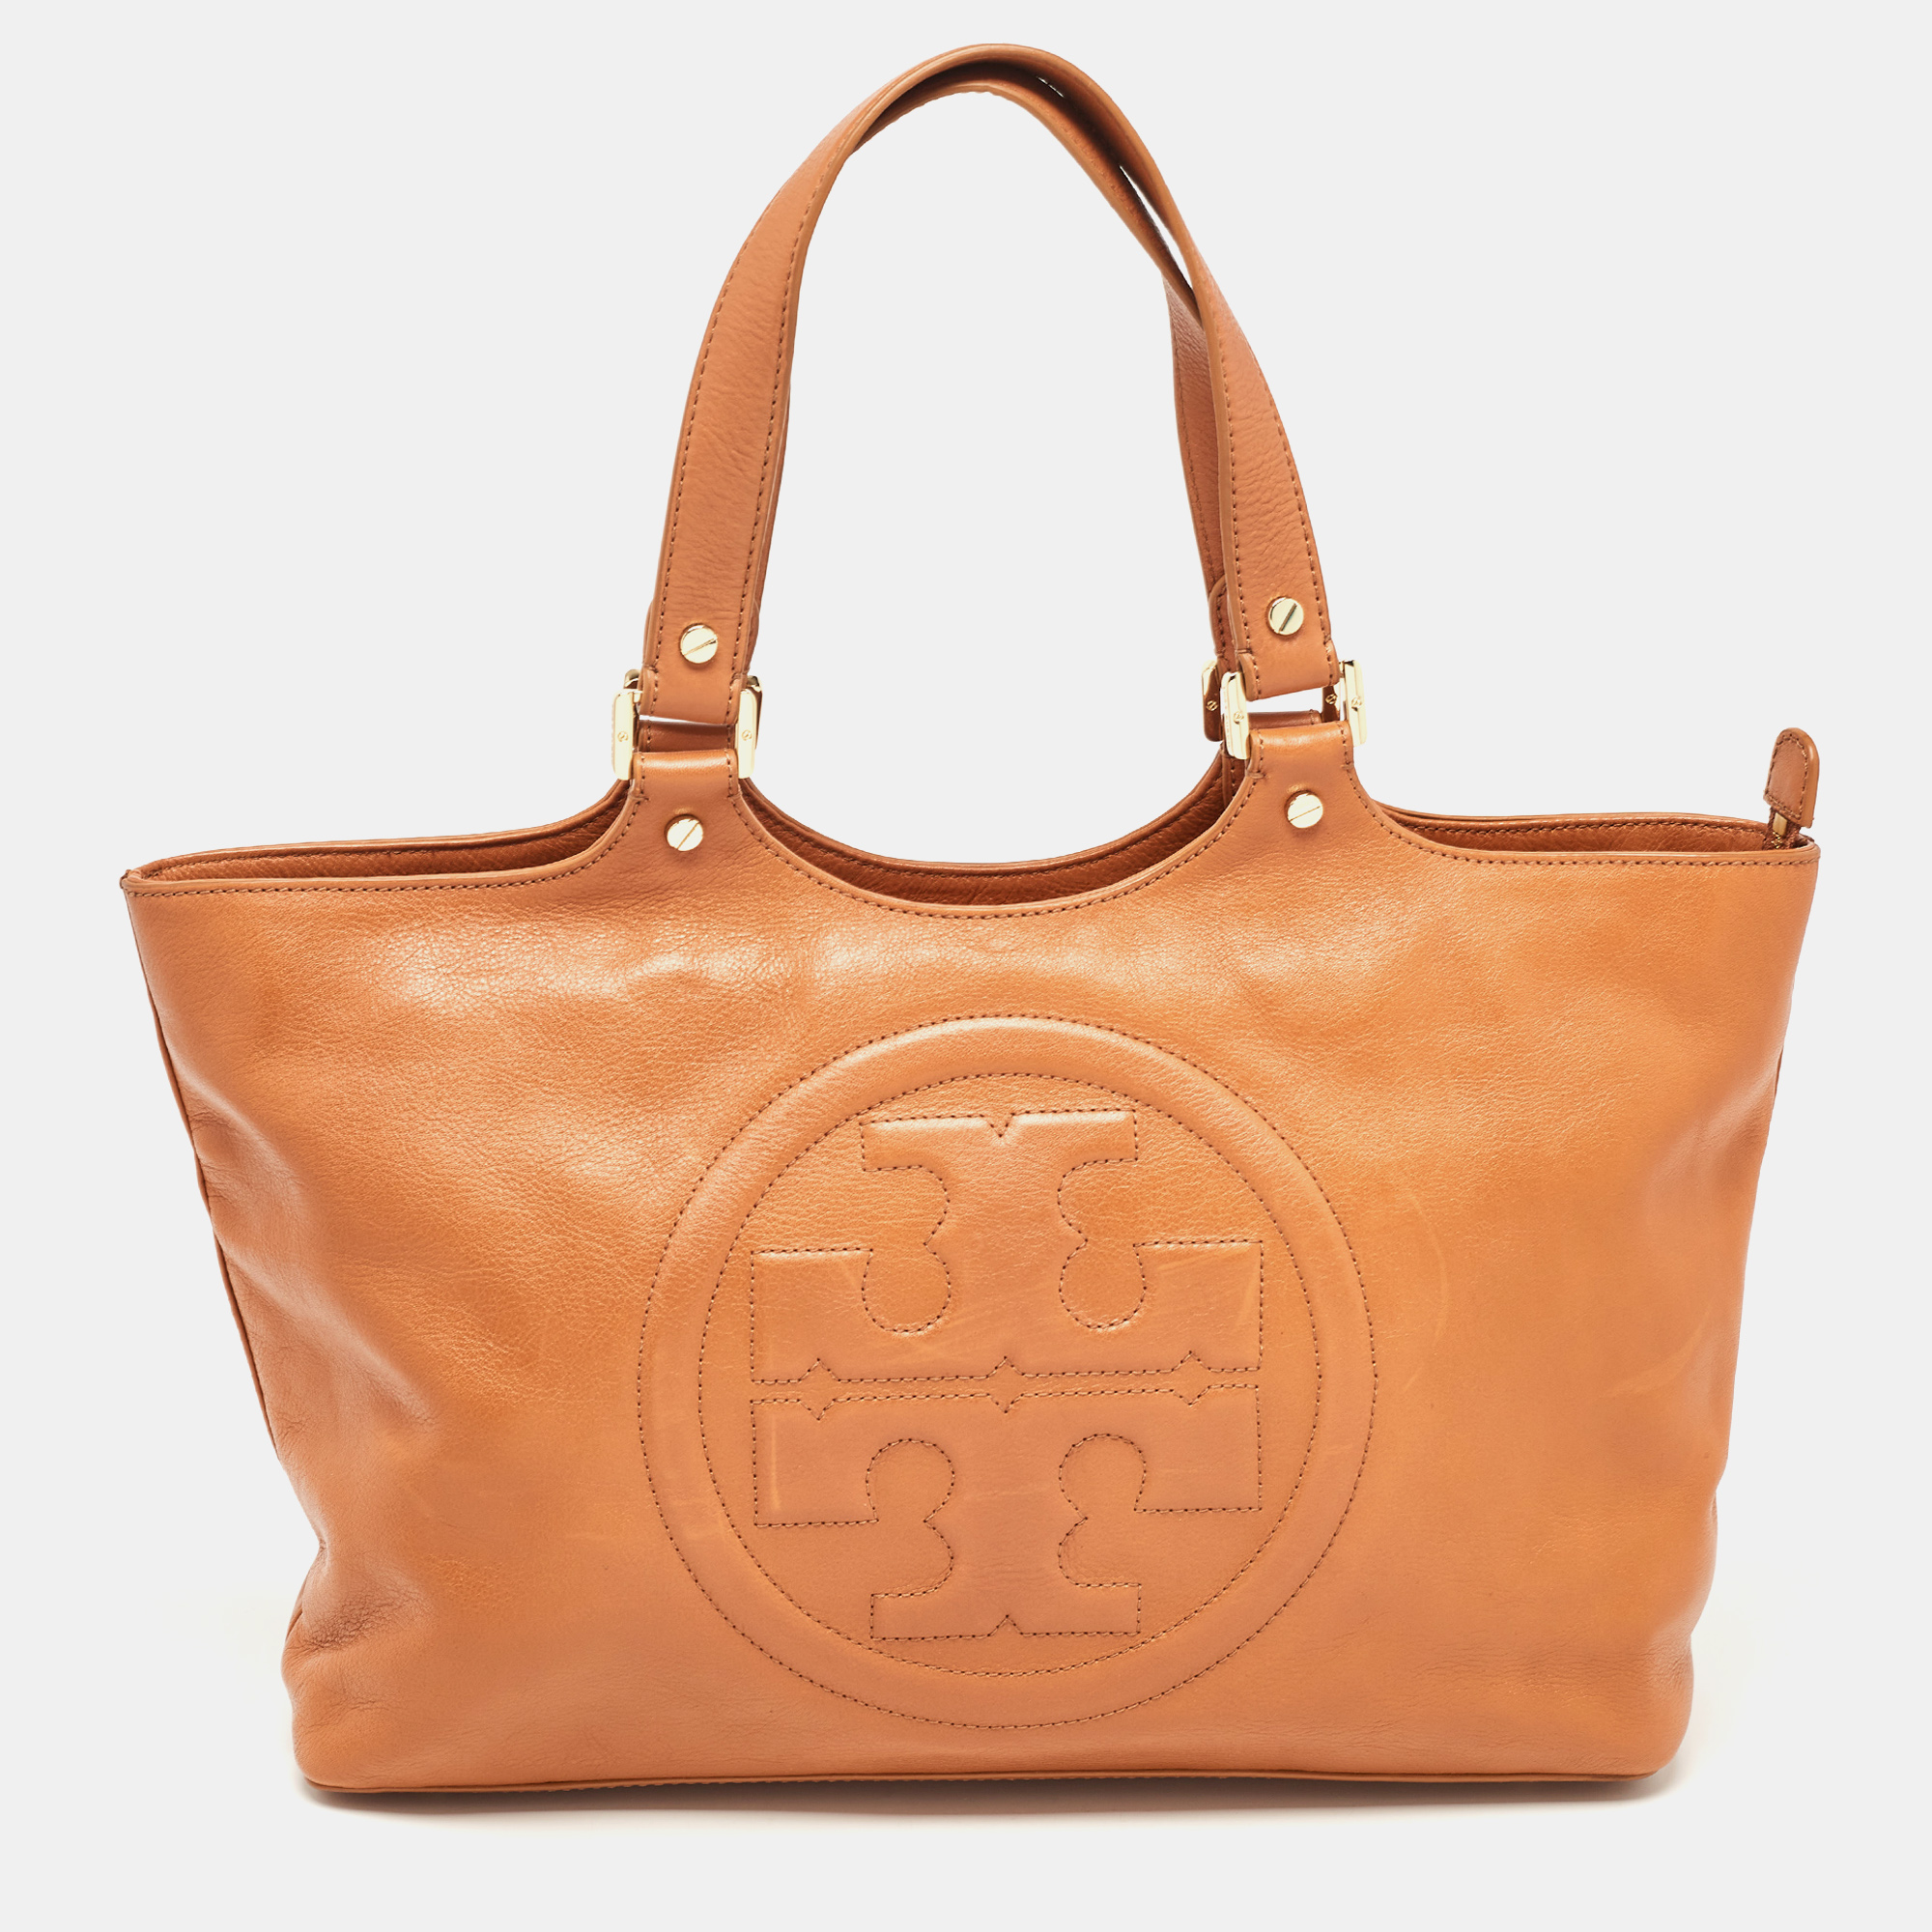 Tory Burch Brown Leather Bombe Tote